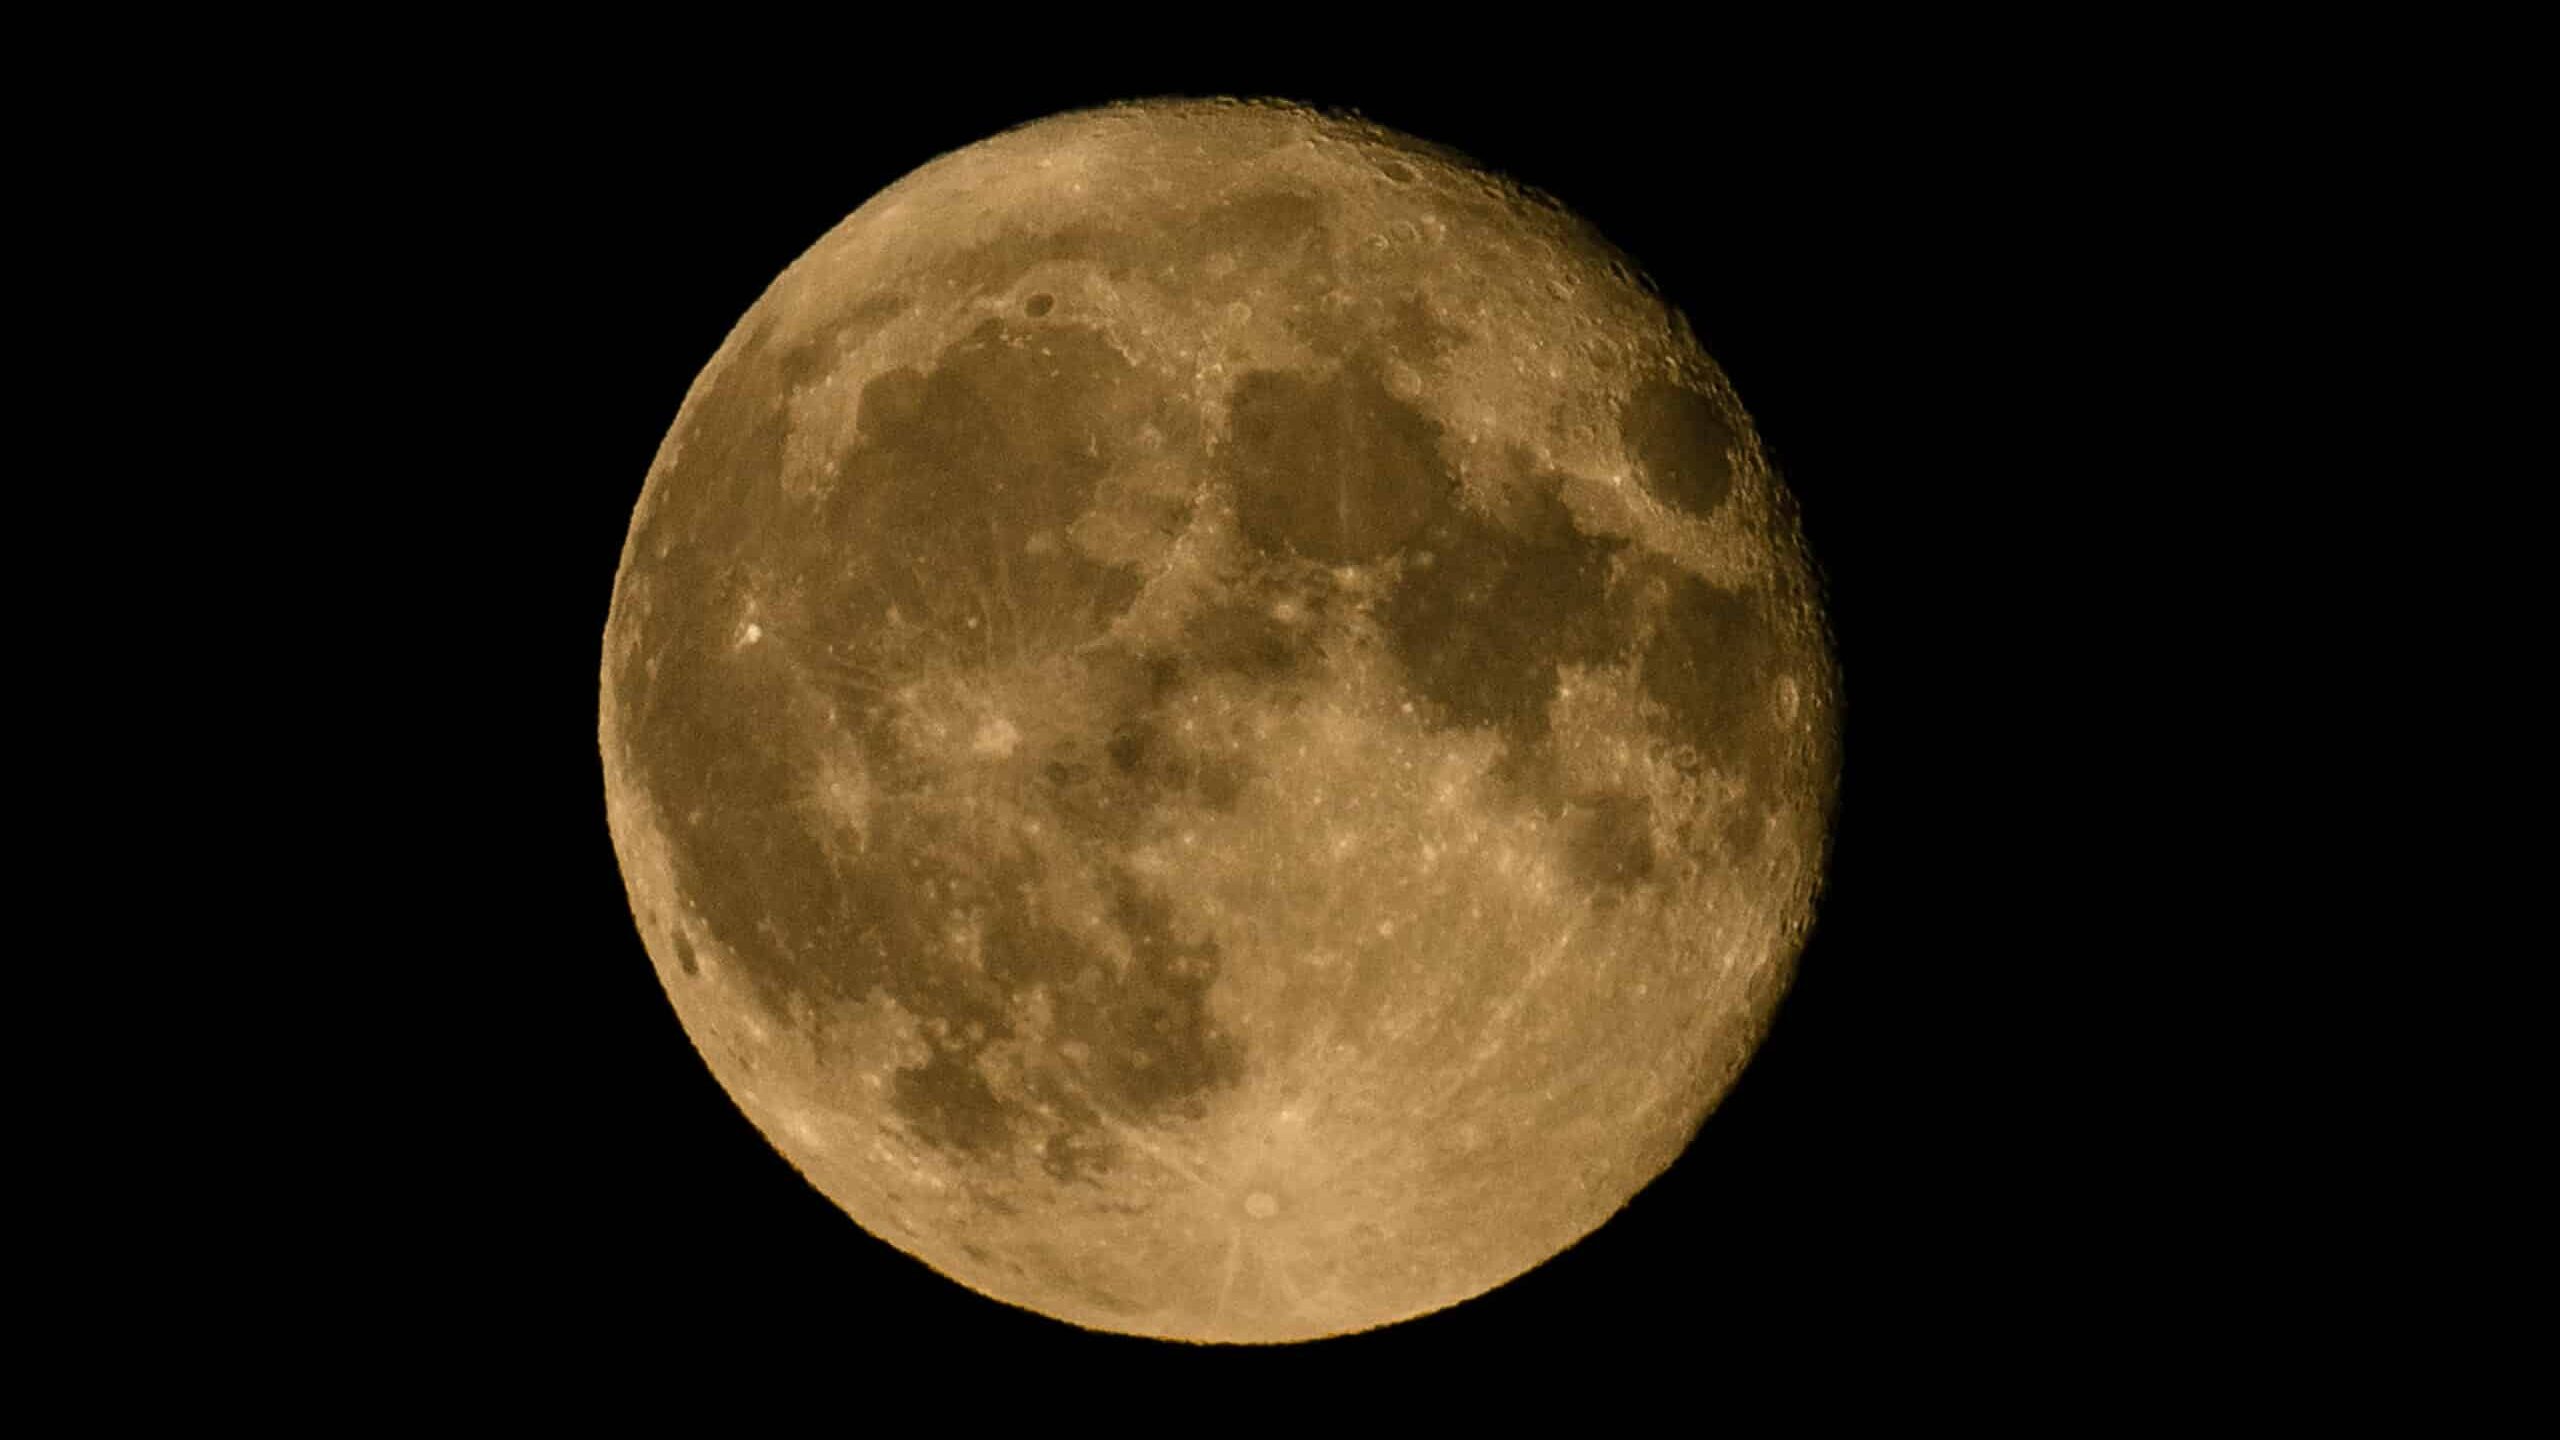 TURIN, ITALY - AUGUST 2:The Sturgeon Super Moon is seen on August 2, 2023 in Turin, Italy. This is the first of two super moons in the month of August, with the end of the month seeing a rare super blue moon, which happens about once every ten years.